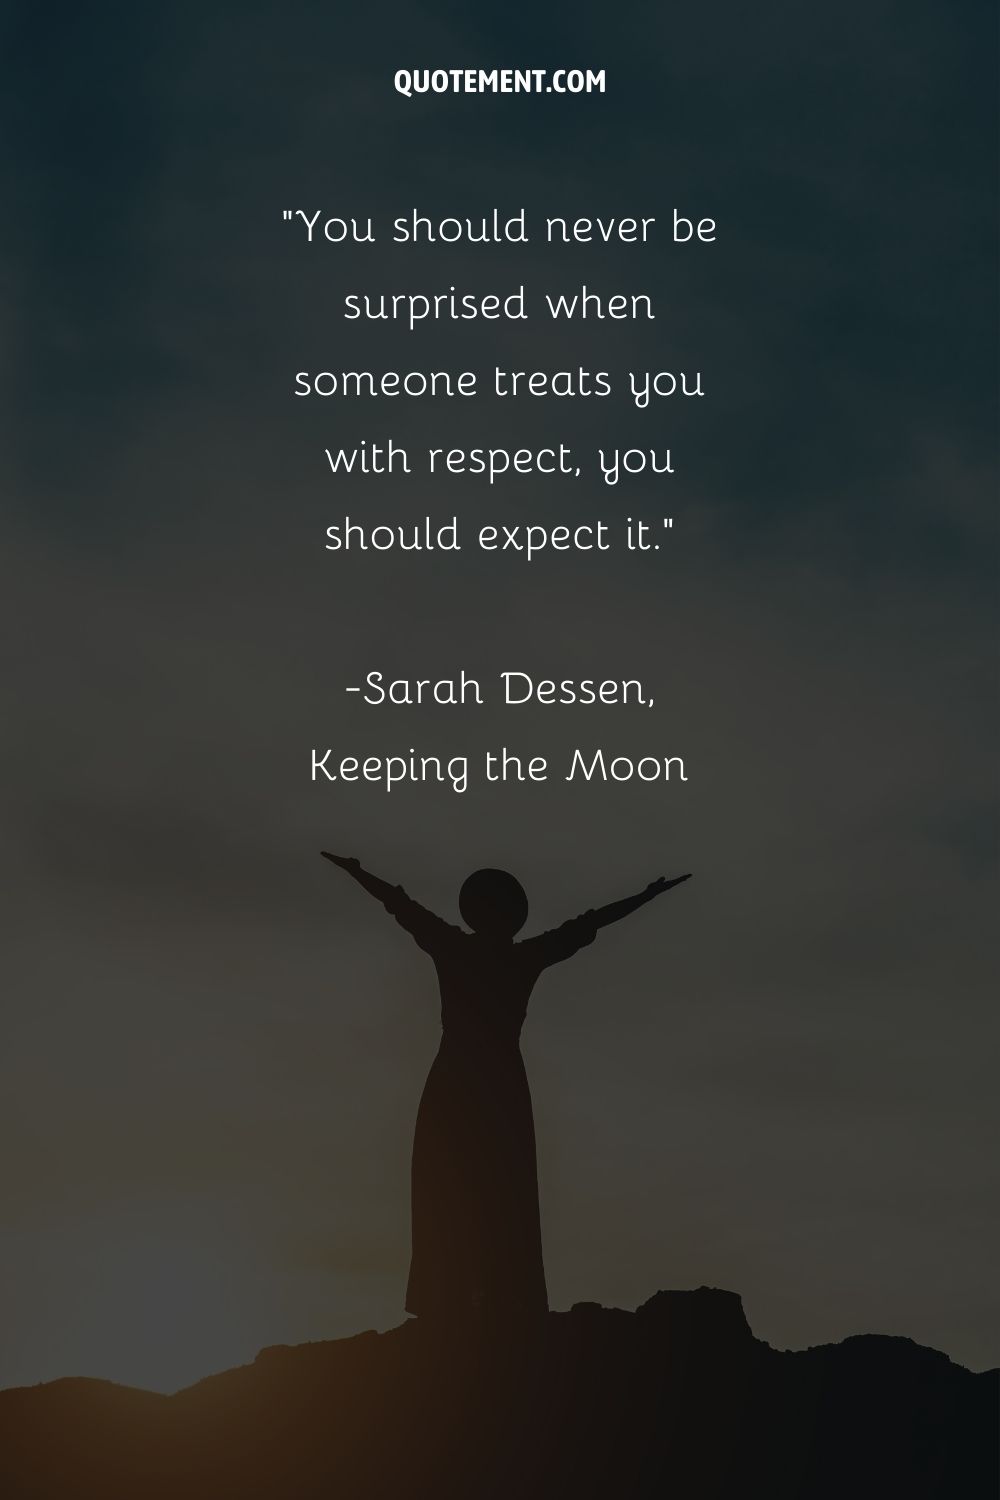 You should never be surprised when someone treats you with respect, you should expect it